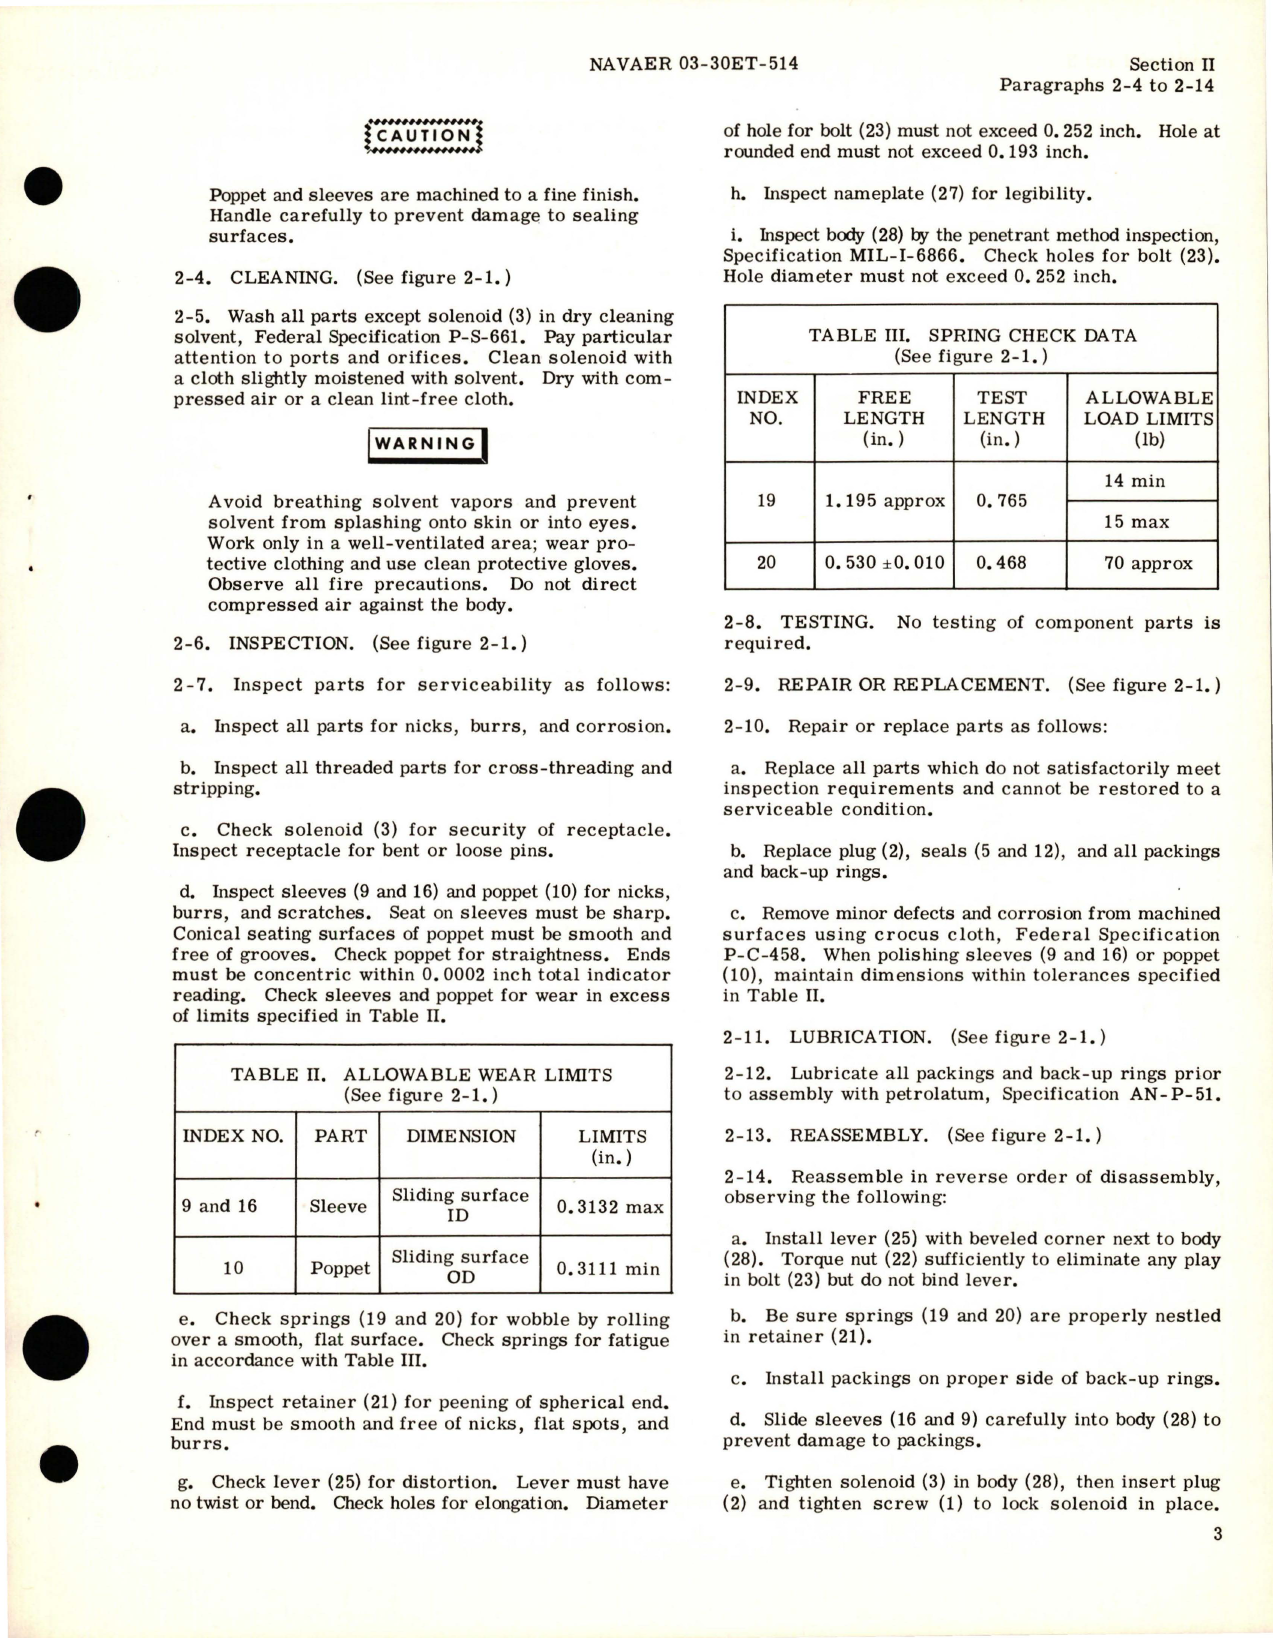 Sample page 5 from AirCorps Library document: Overhaul Instructions for Solenoid-Operated Hydraulic Control Valve - Part 51000 